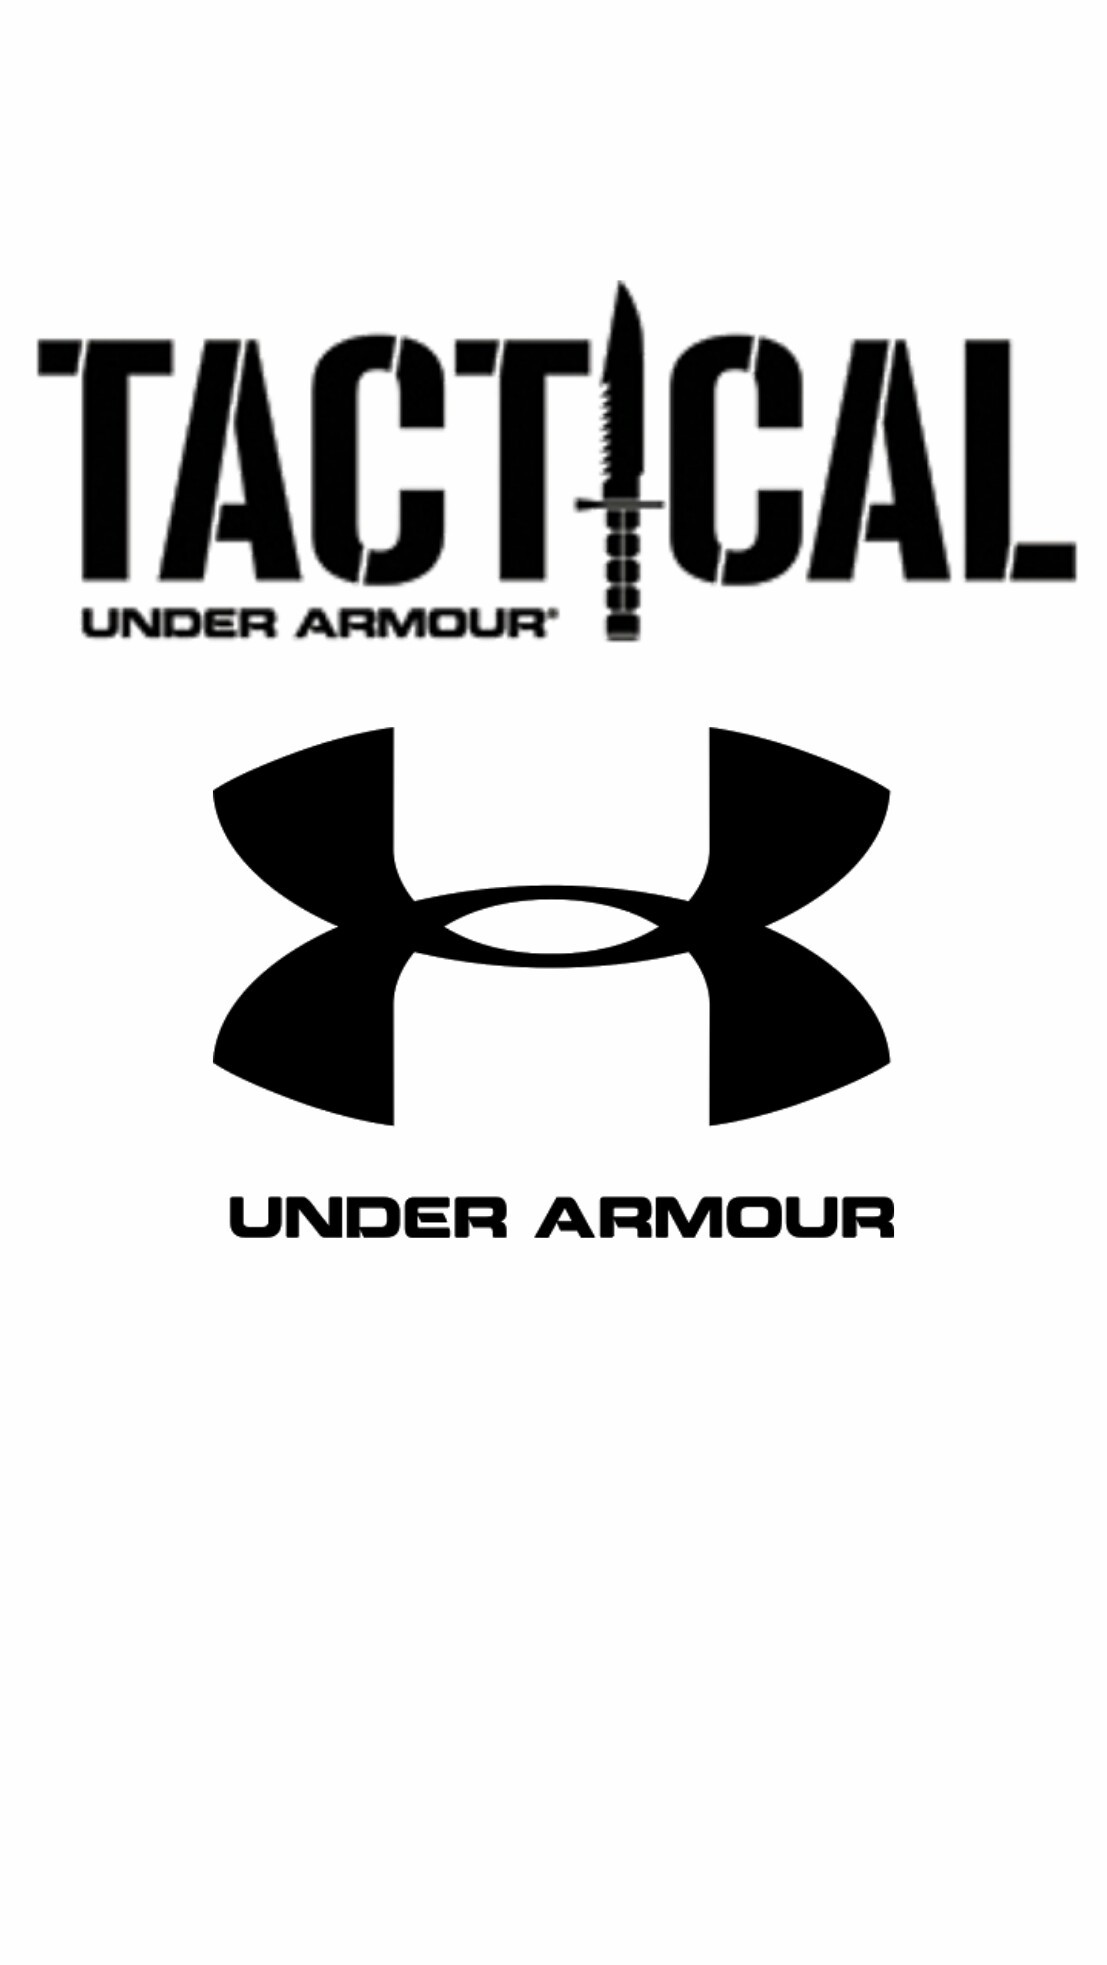 under armour wallpaper iphone 5